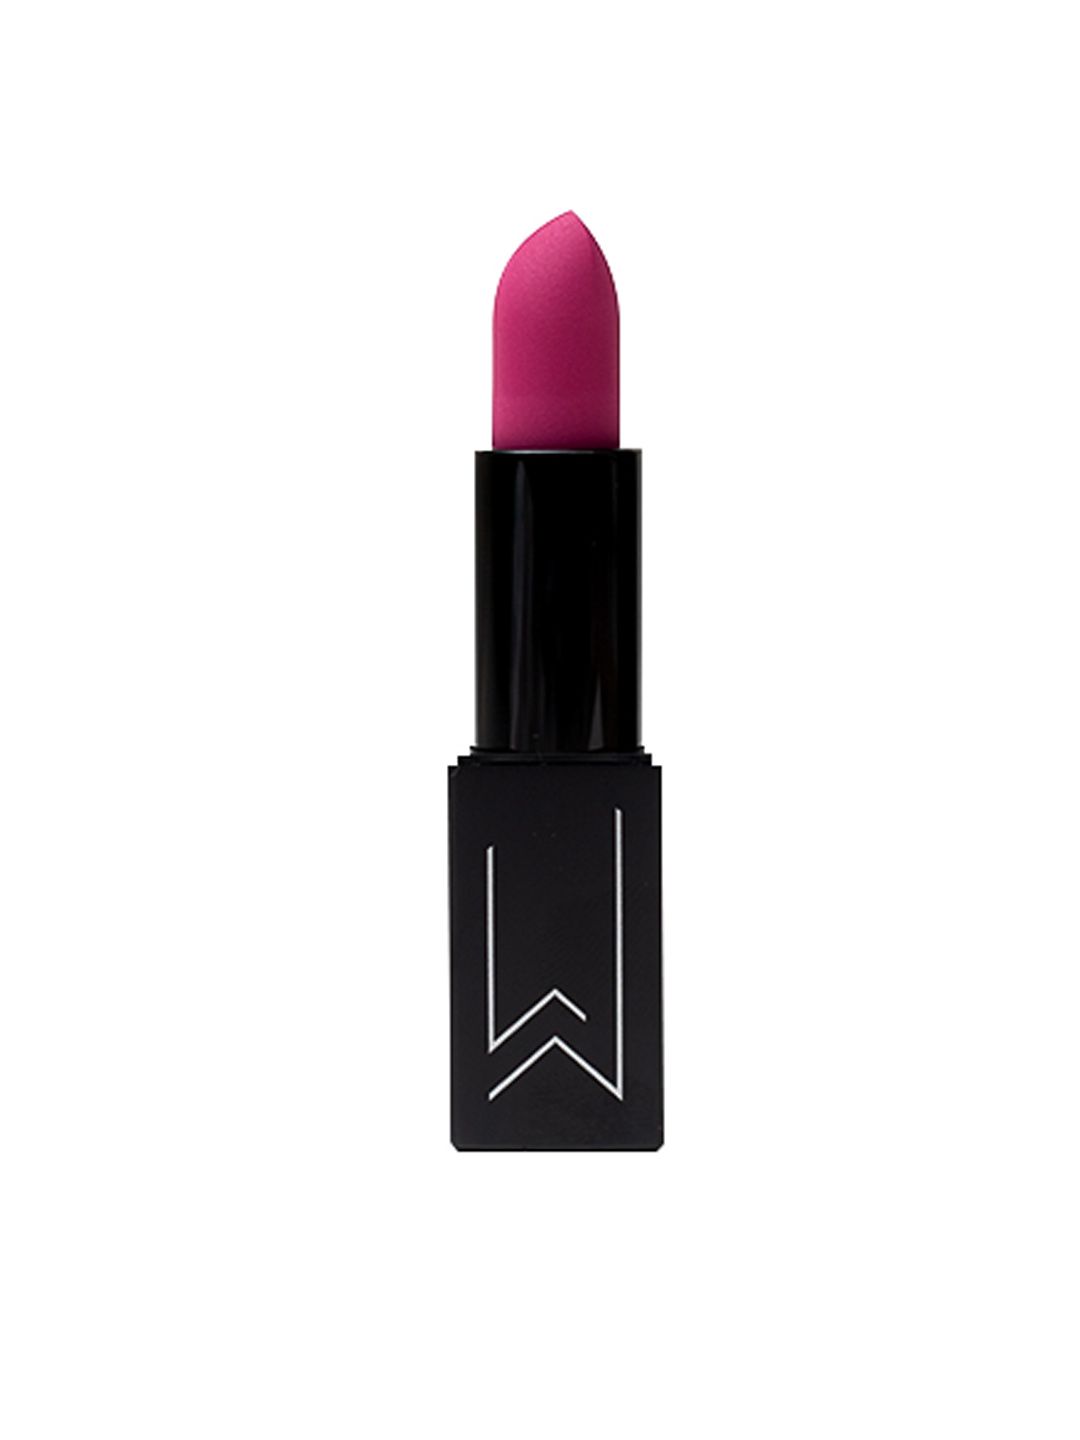 PAC Long Lasting Full Pigment Matte Mischief Lipstick - Pinky Kinky 06 Price in India